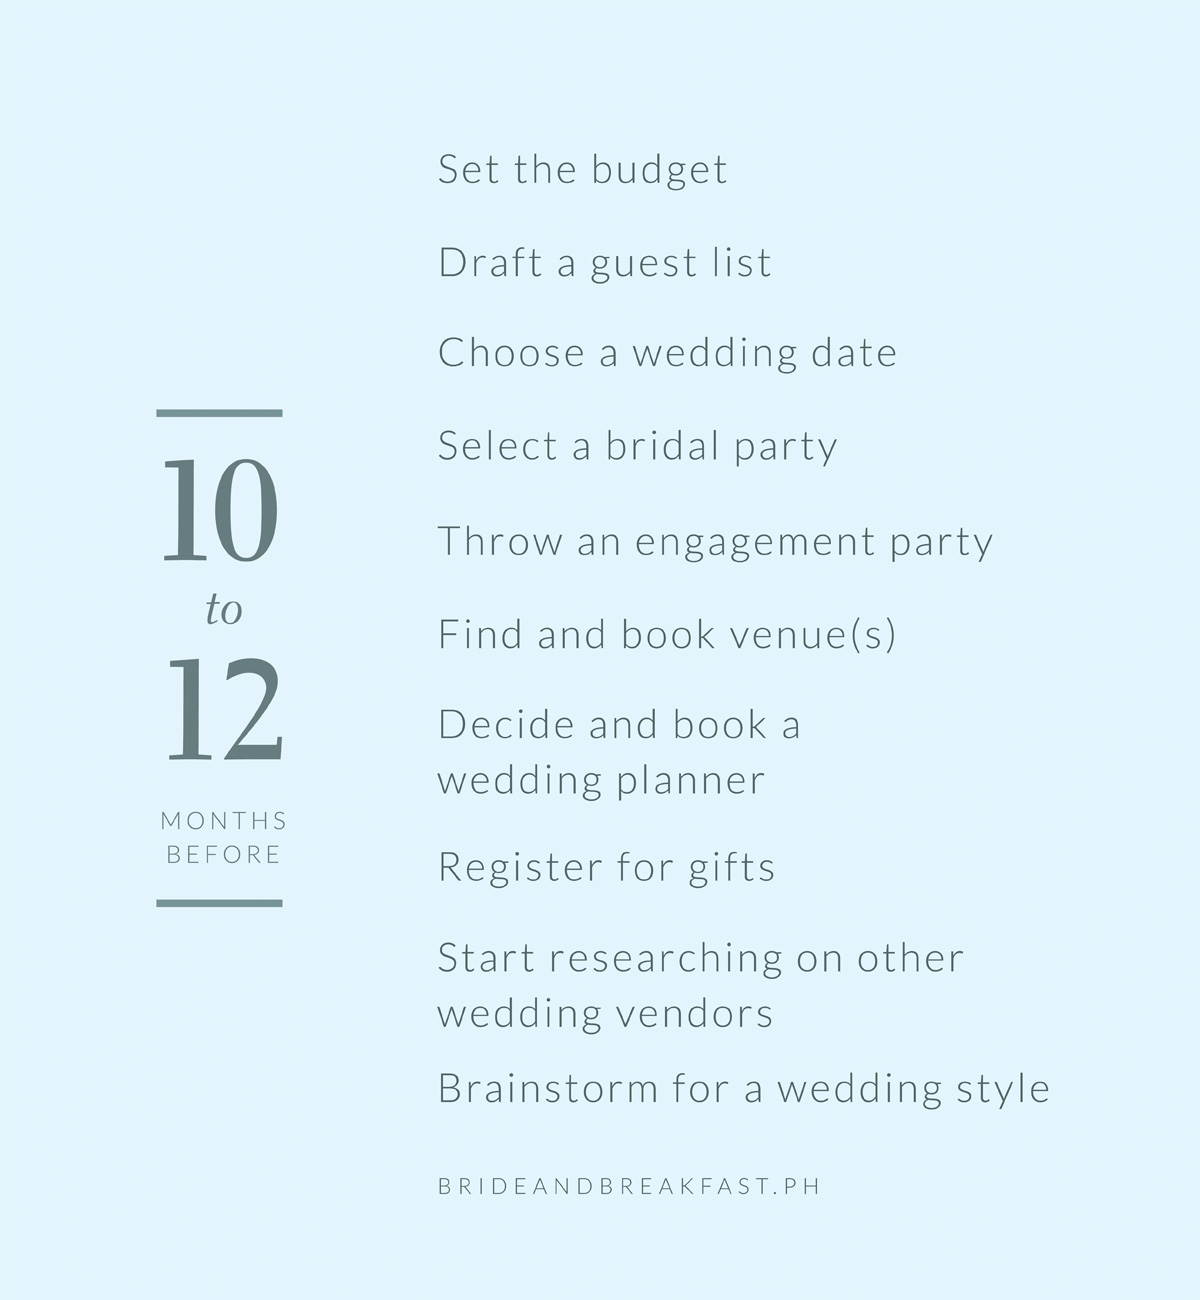 10-12 months before Set the budget Draft a guest list Choose a wedding date Select a bridal party Throw an engagement party Find and book venue(s) Decide and book a wedding planner Register for gifts Start researching on other wedding vendors Brainstorm for a wedding style